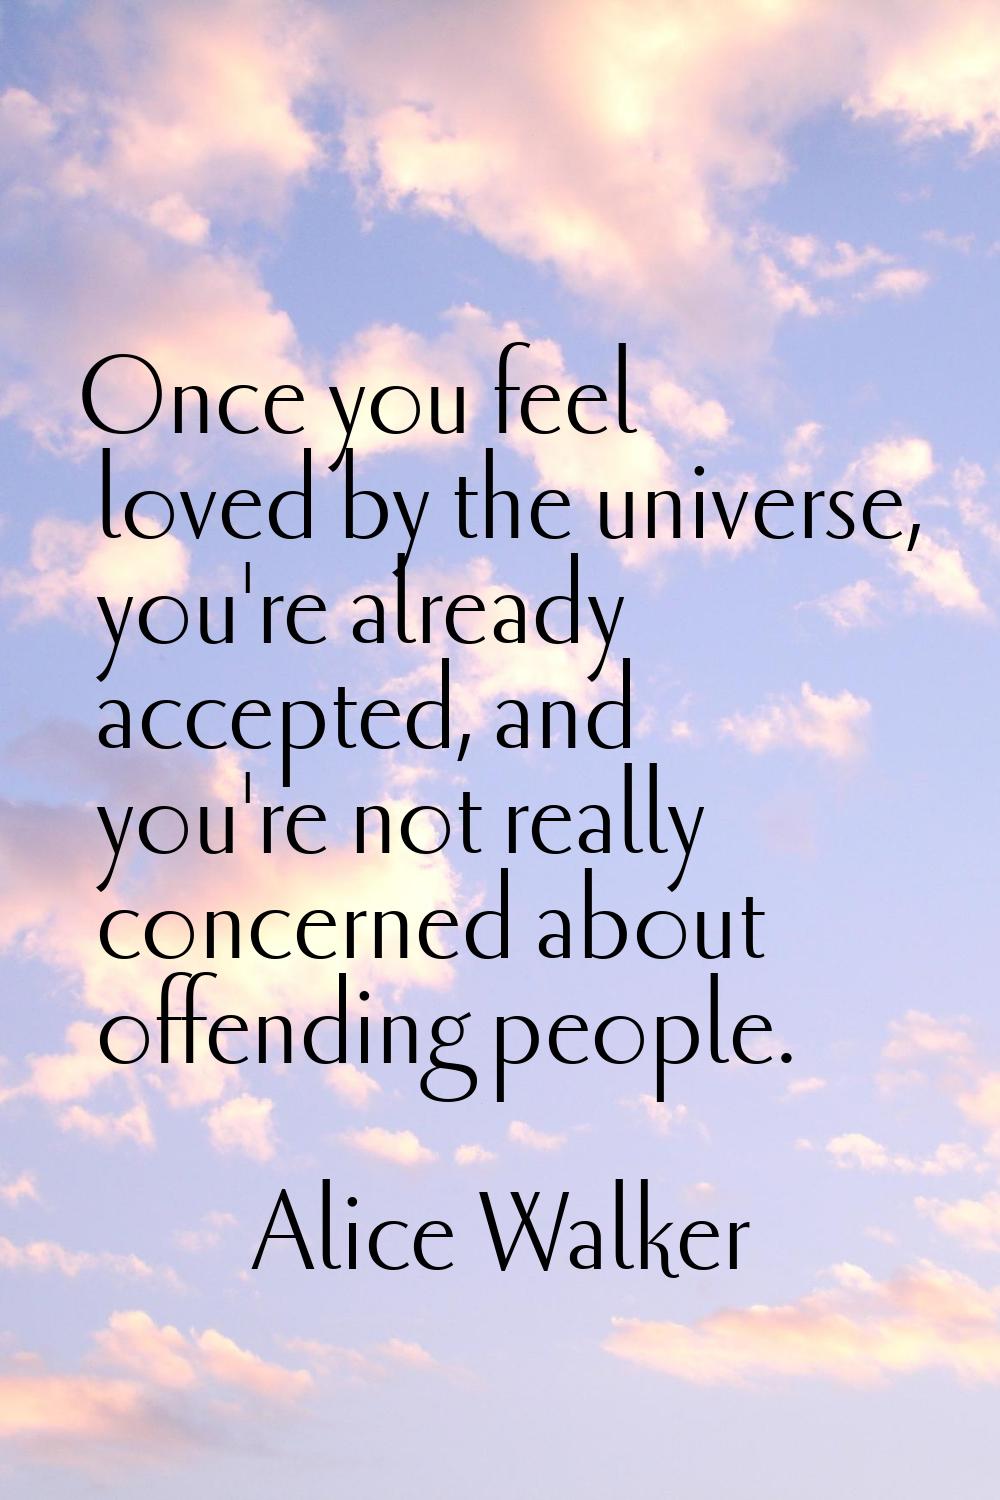 Once you feel loved by the universe, you're already accepted, and you're not really concerned about